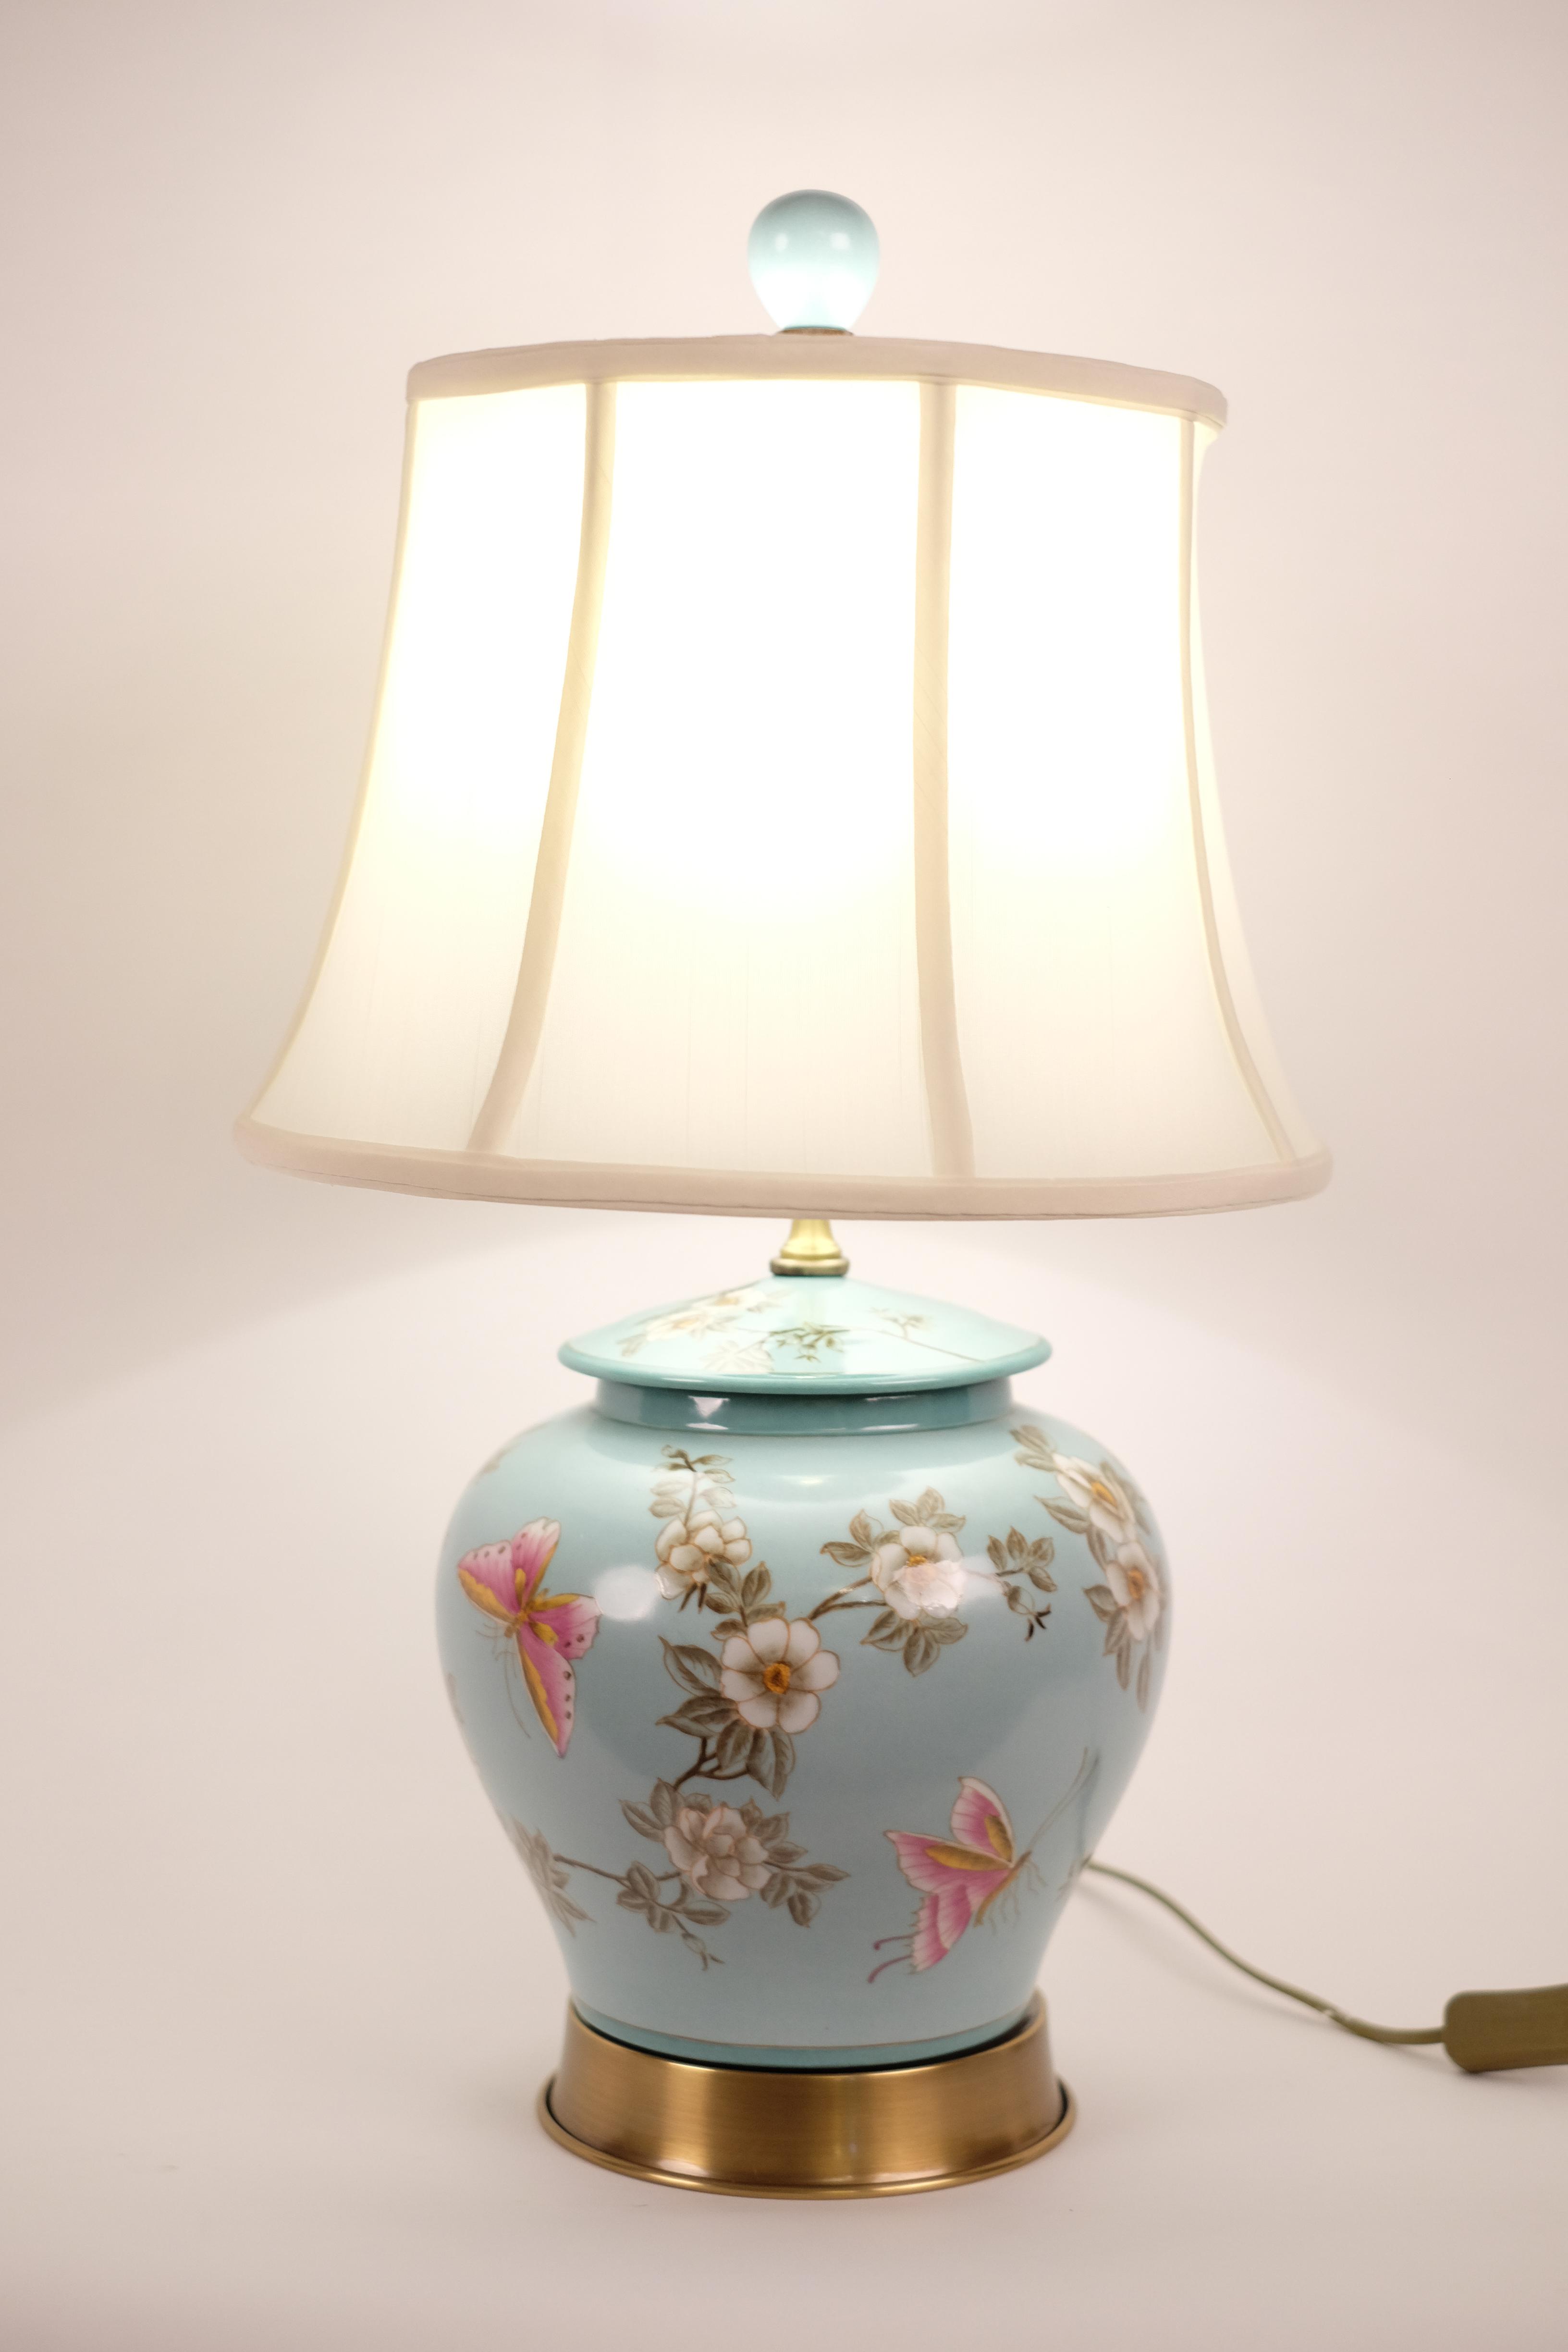 Chinese Porcelain Table Lamp Handpainted Ginger-pot Style Turquoise